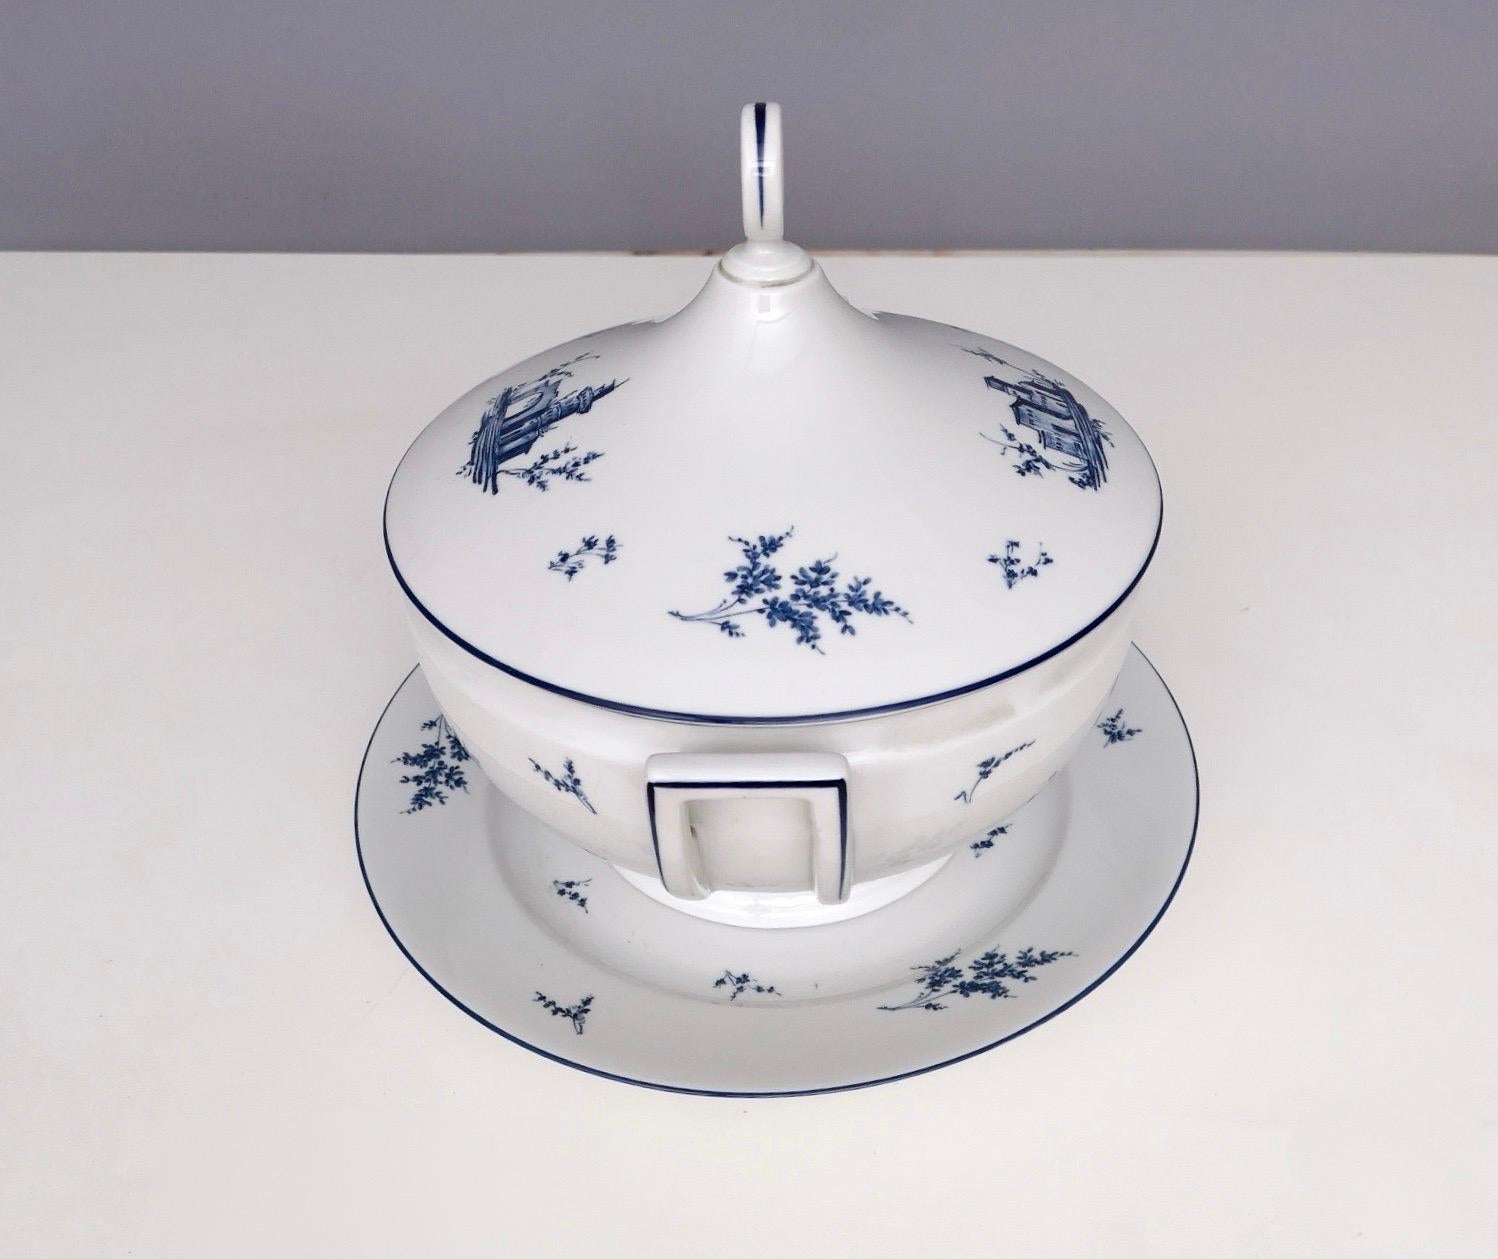 Italian Neoclassical Richard Ginori White and Blue Porcelain Serving Dish, Italy For Sale